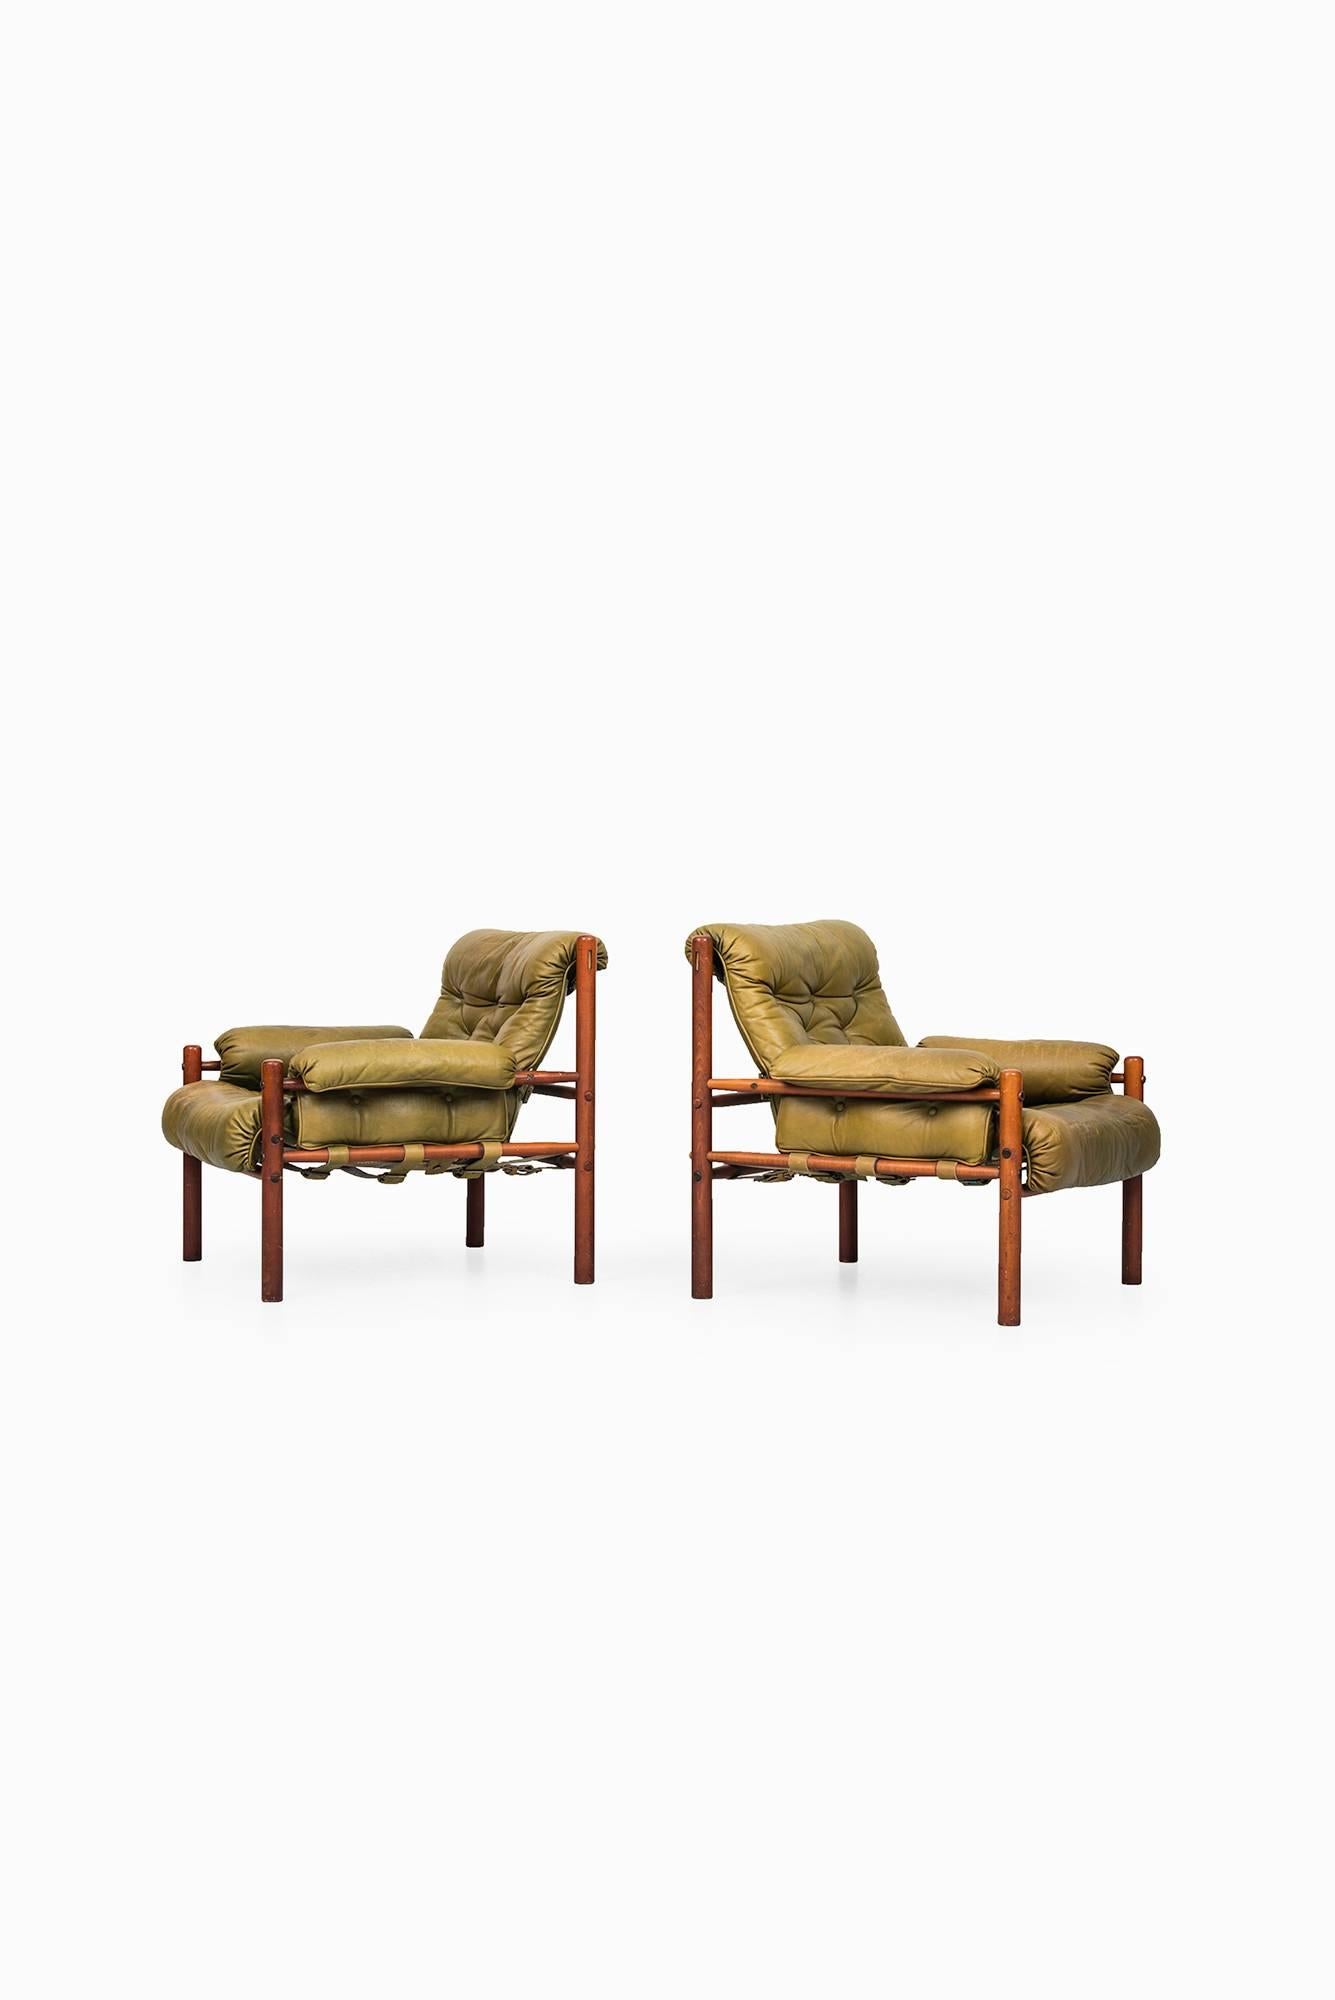 A pair of easy chairs designed by Arne Norell. Produced by Arne Norell AB in Aneby, Sweden.